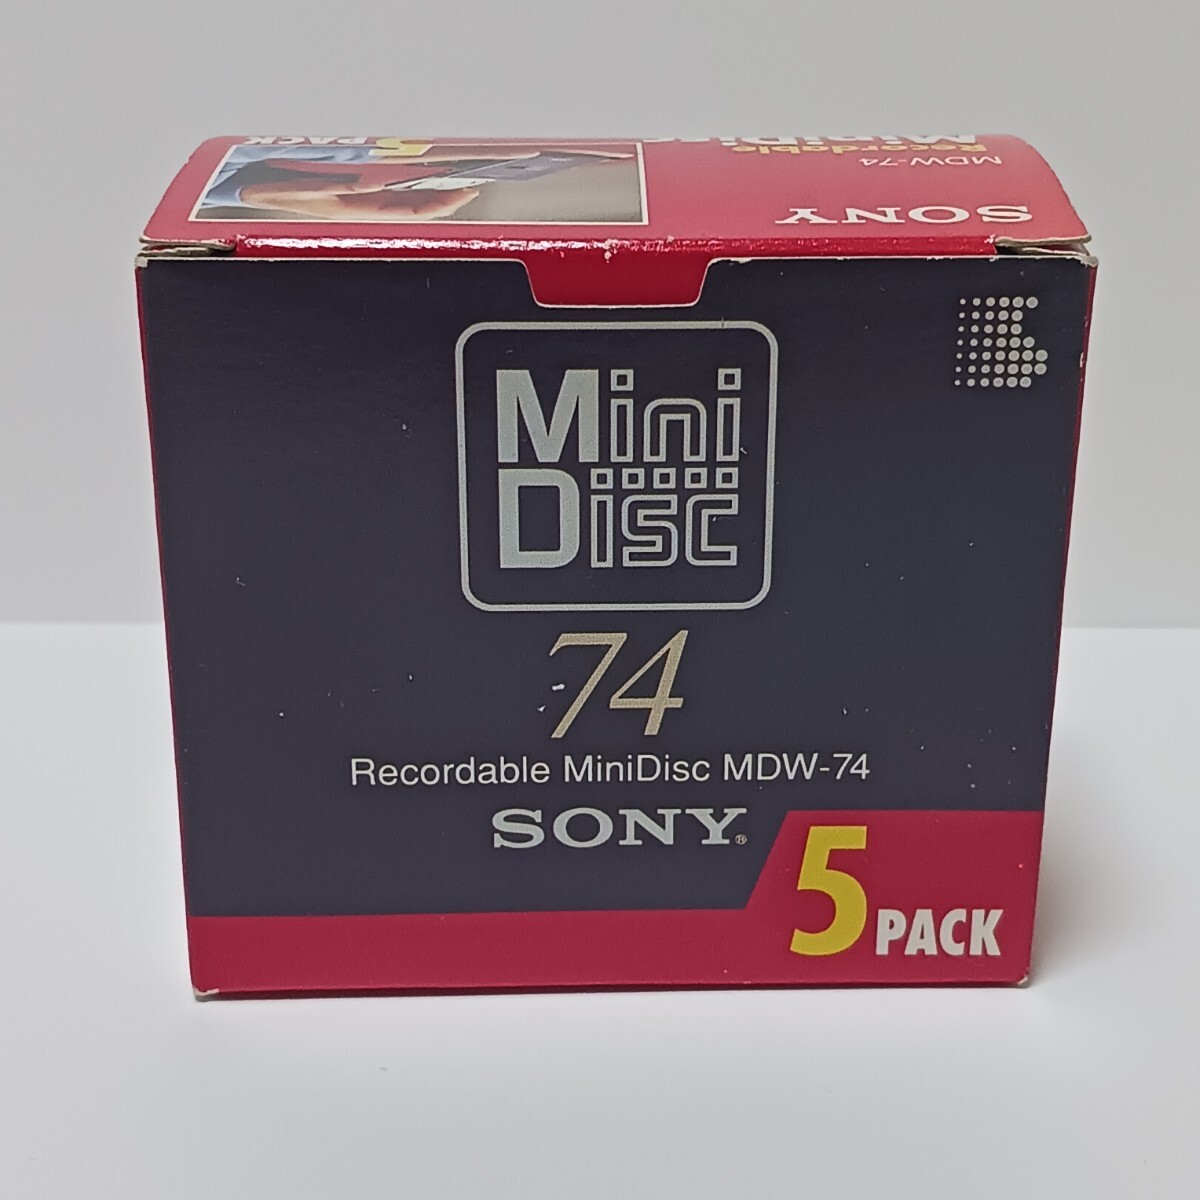 MD / Mini disk SONY MDW-74 origin box attaching 5PACK 5 sheets entering * unopened * unused * Sony MiniDisc